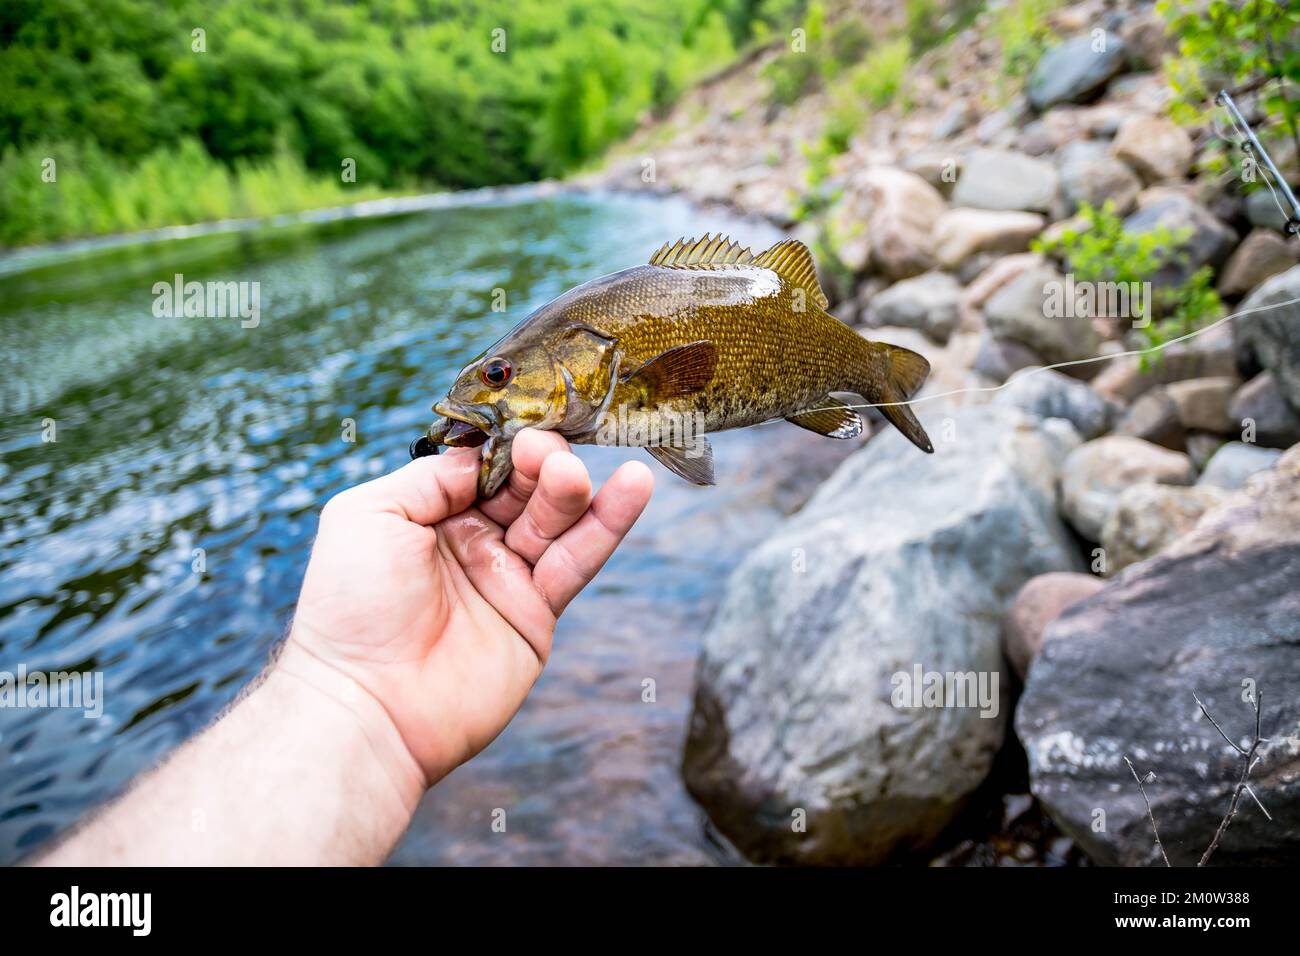 Holding great summer catch, bass fishing, fun day on the lake, fishing lure in the mouth Stock Photo